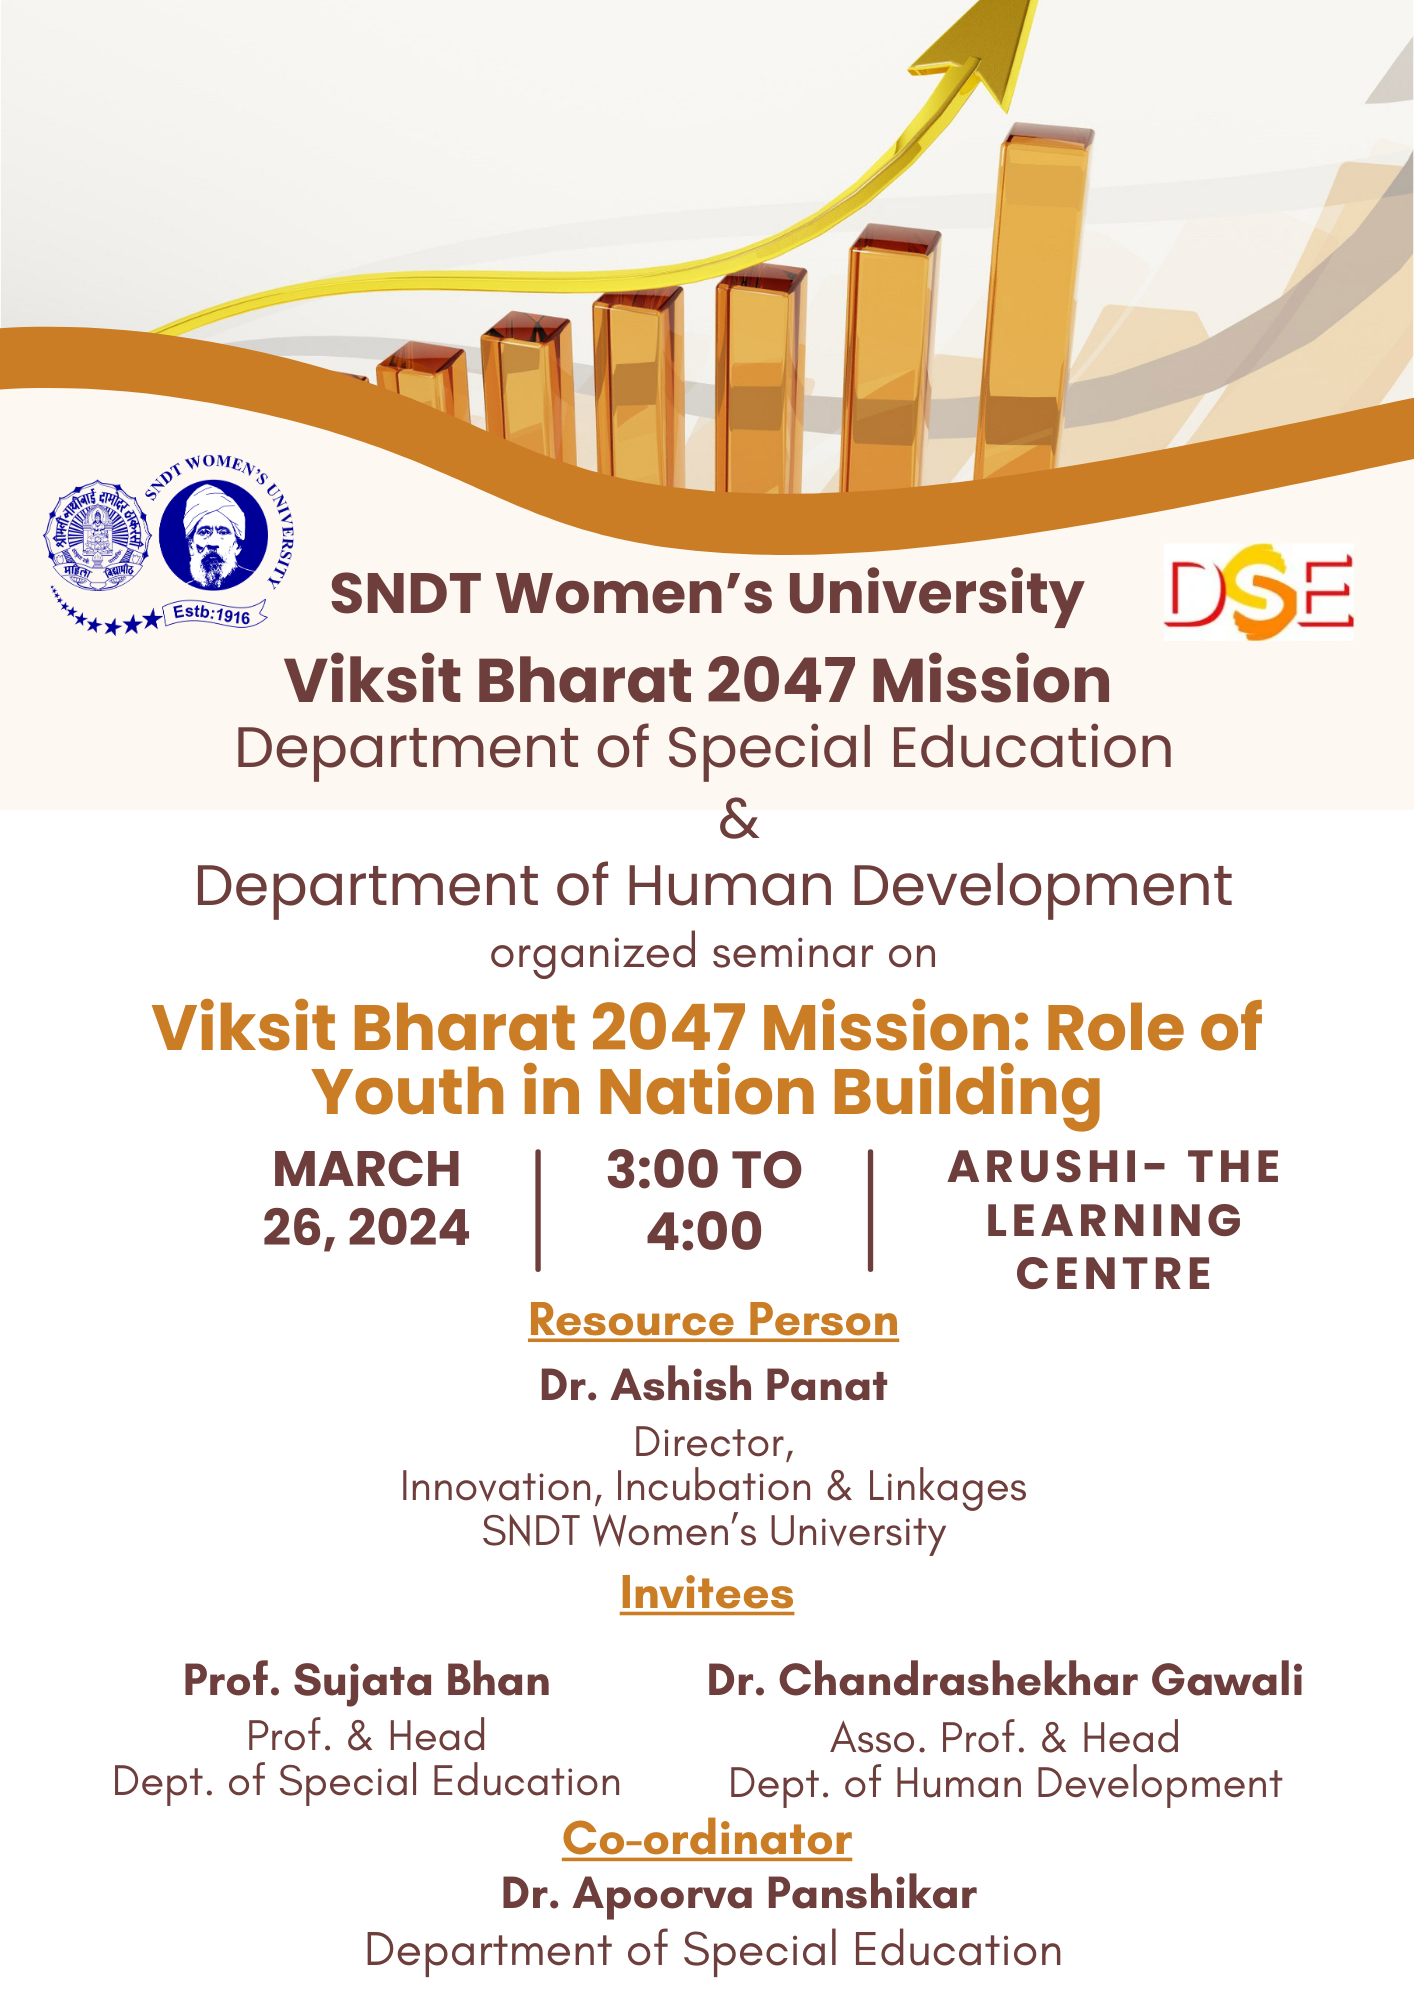 Viksit Bharat @ 2047 Mission: Role of Youth in Nation Building by Dr. Ashish Panat